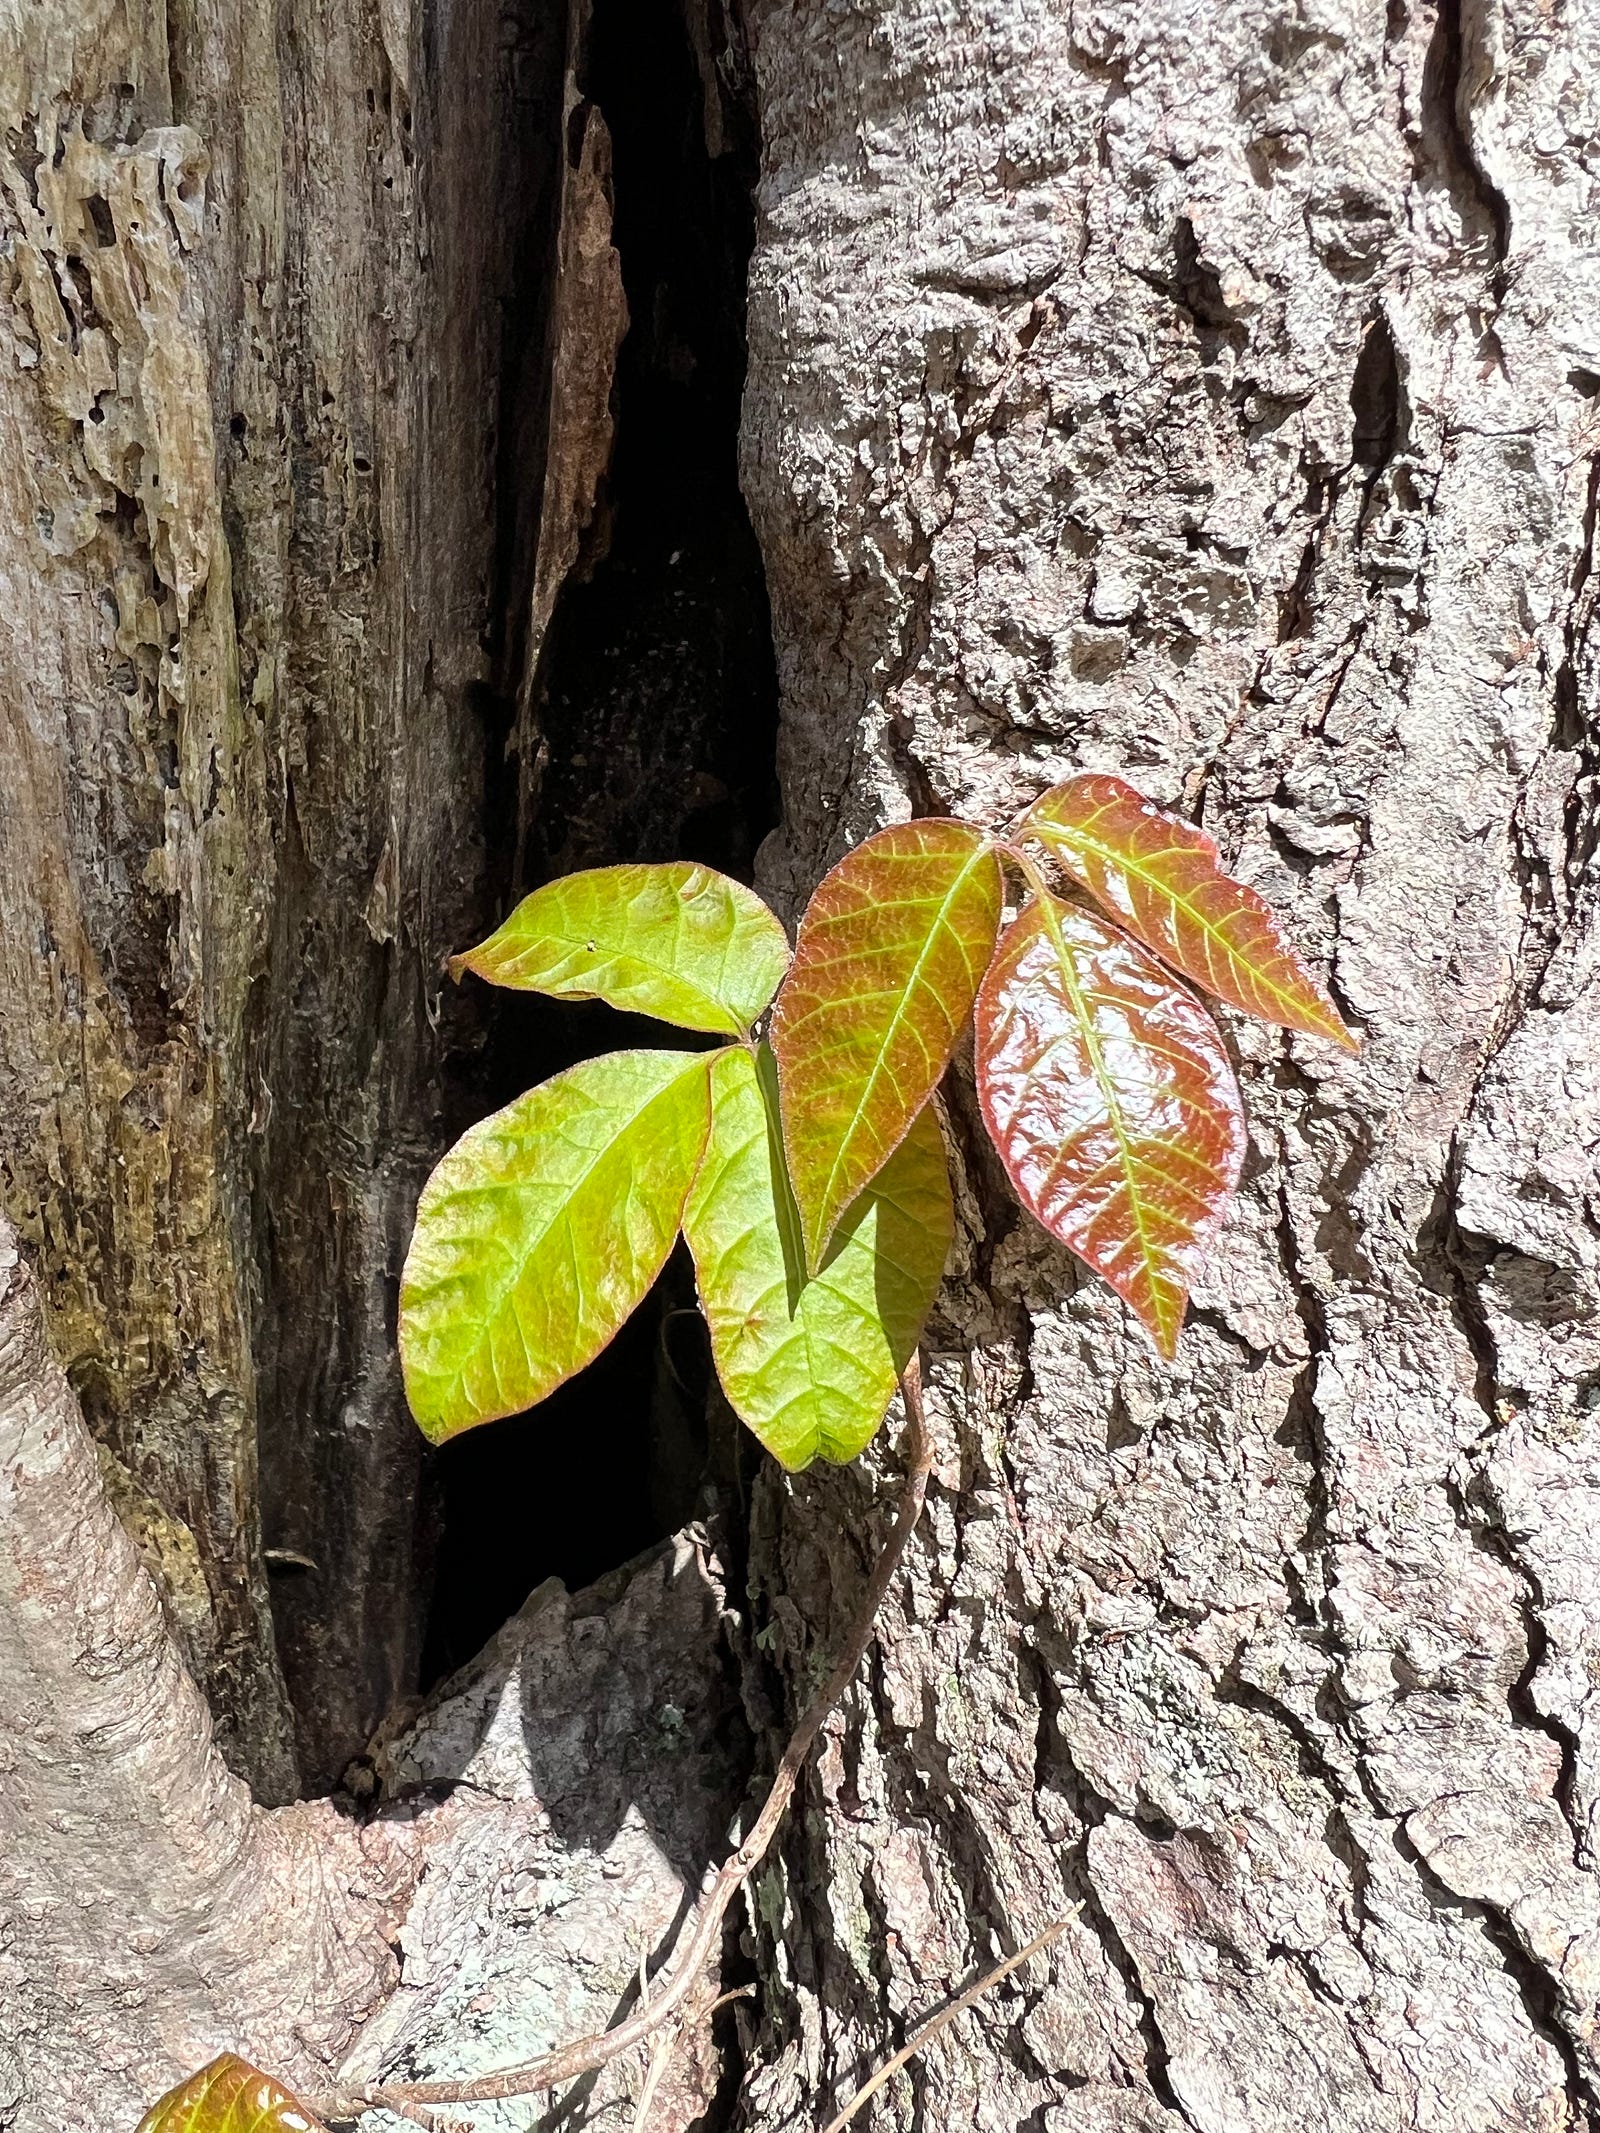 New leaves of poison ivy, colored bright green and bronze in the Merritt Family Forest, Mystic, CT